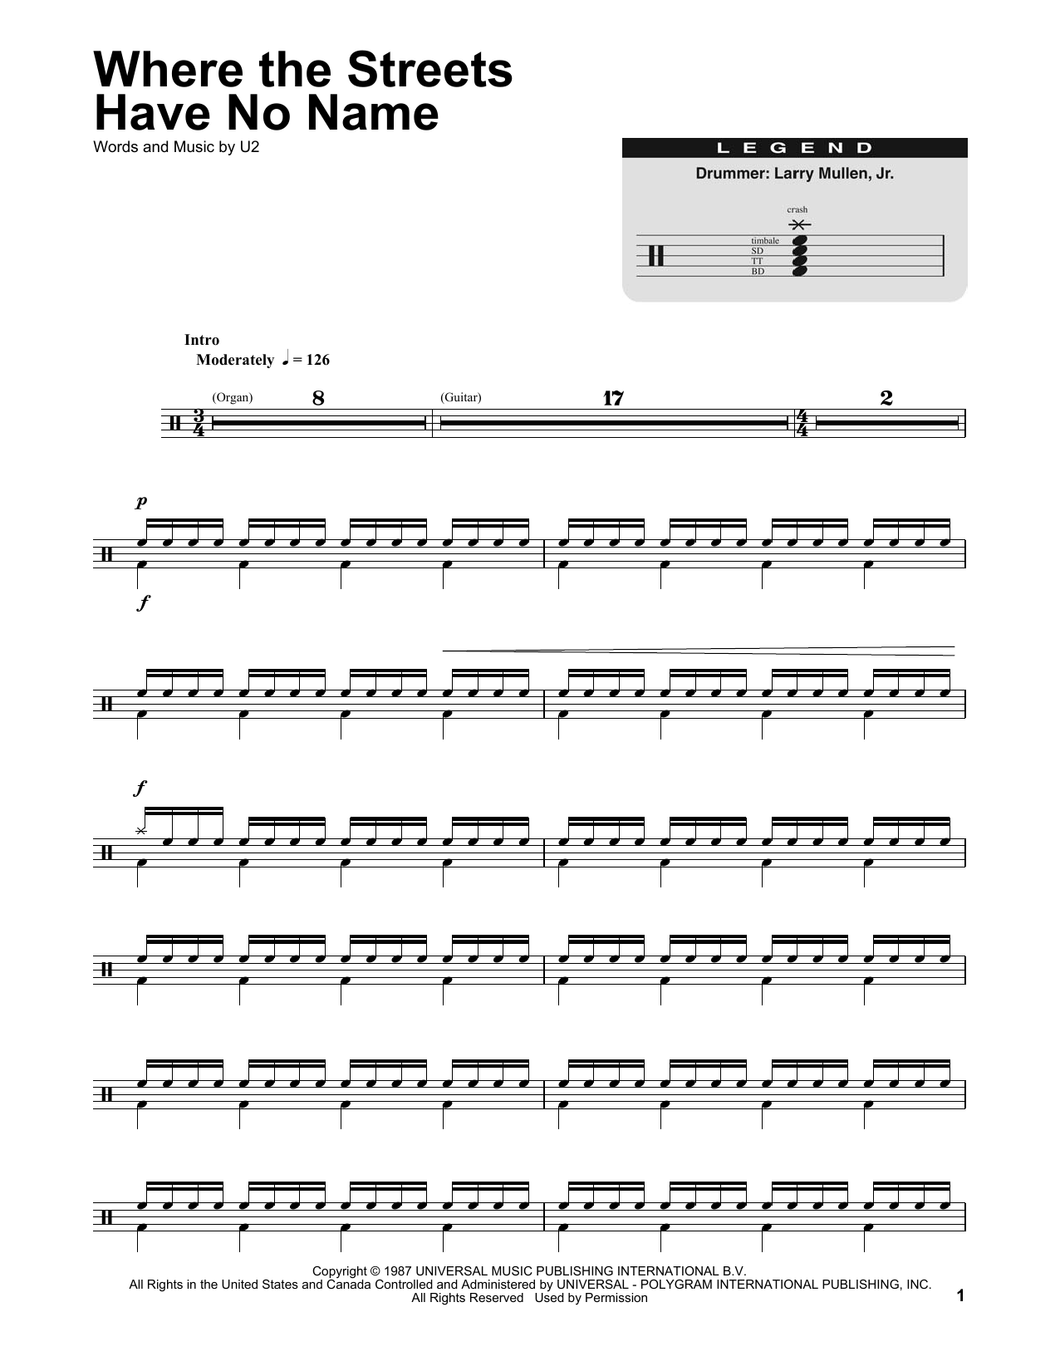 Where the Streets Have No Name - U2 (The Band) - Full Drum Transcription / Drum Sheet Music - SheetMusicDirect DT